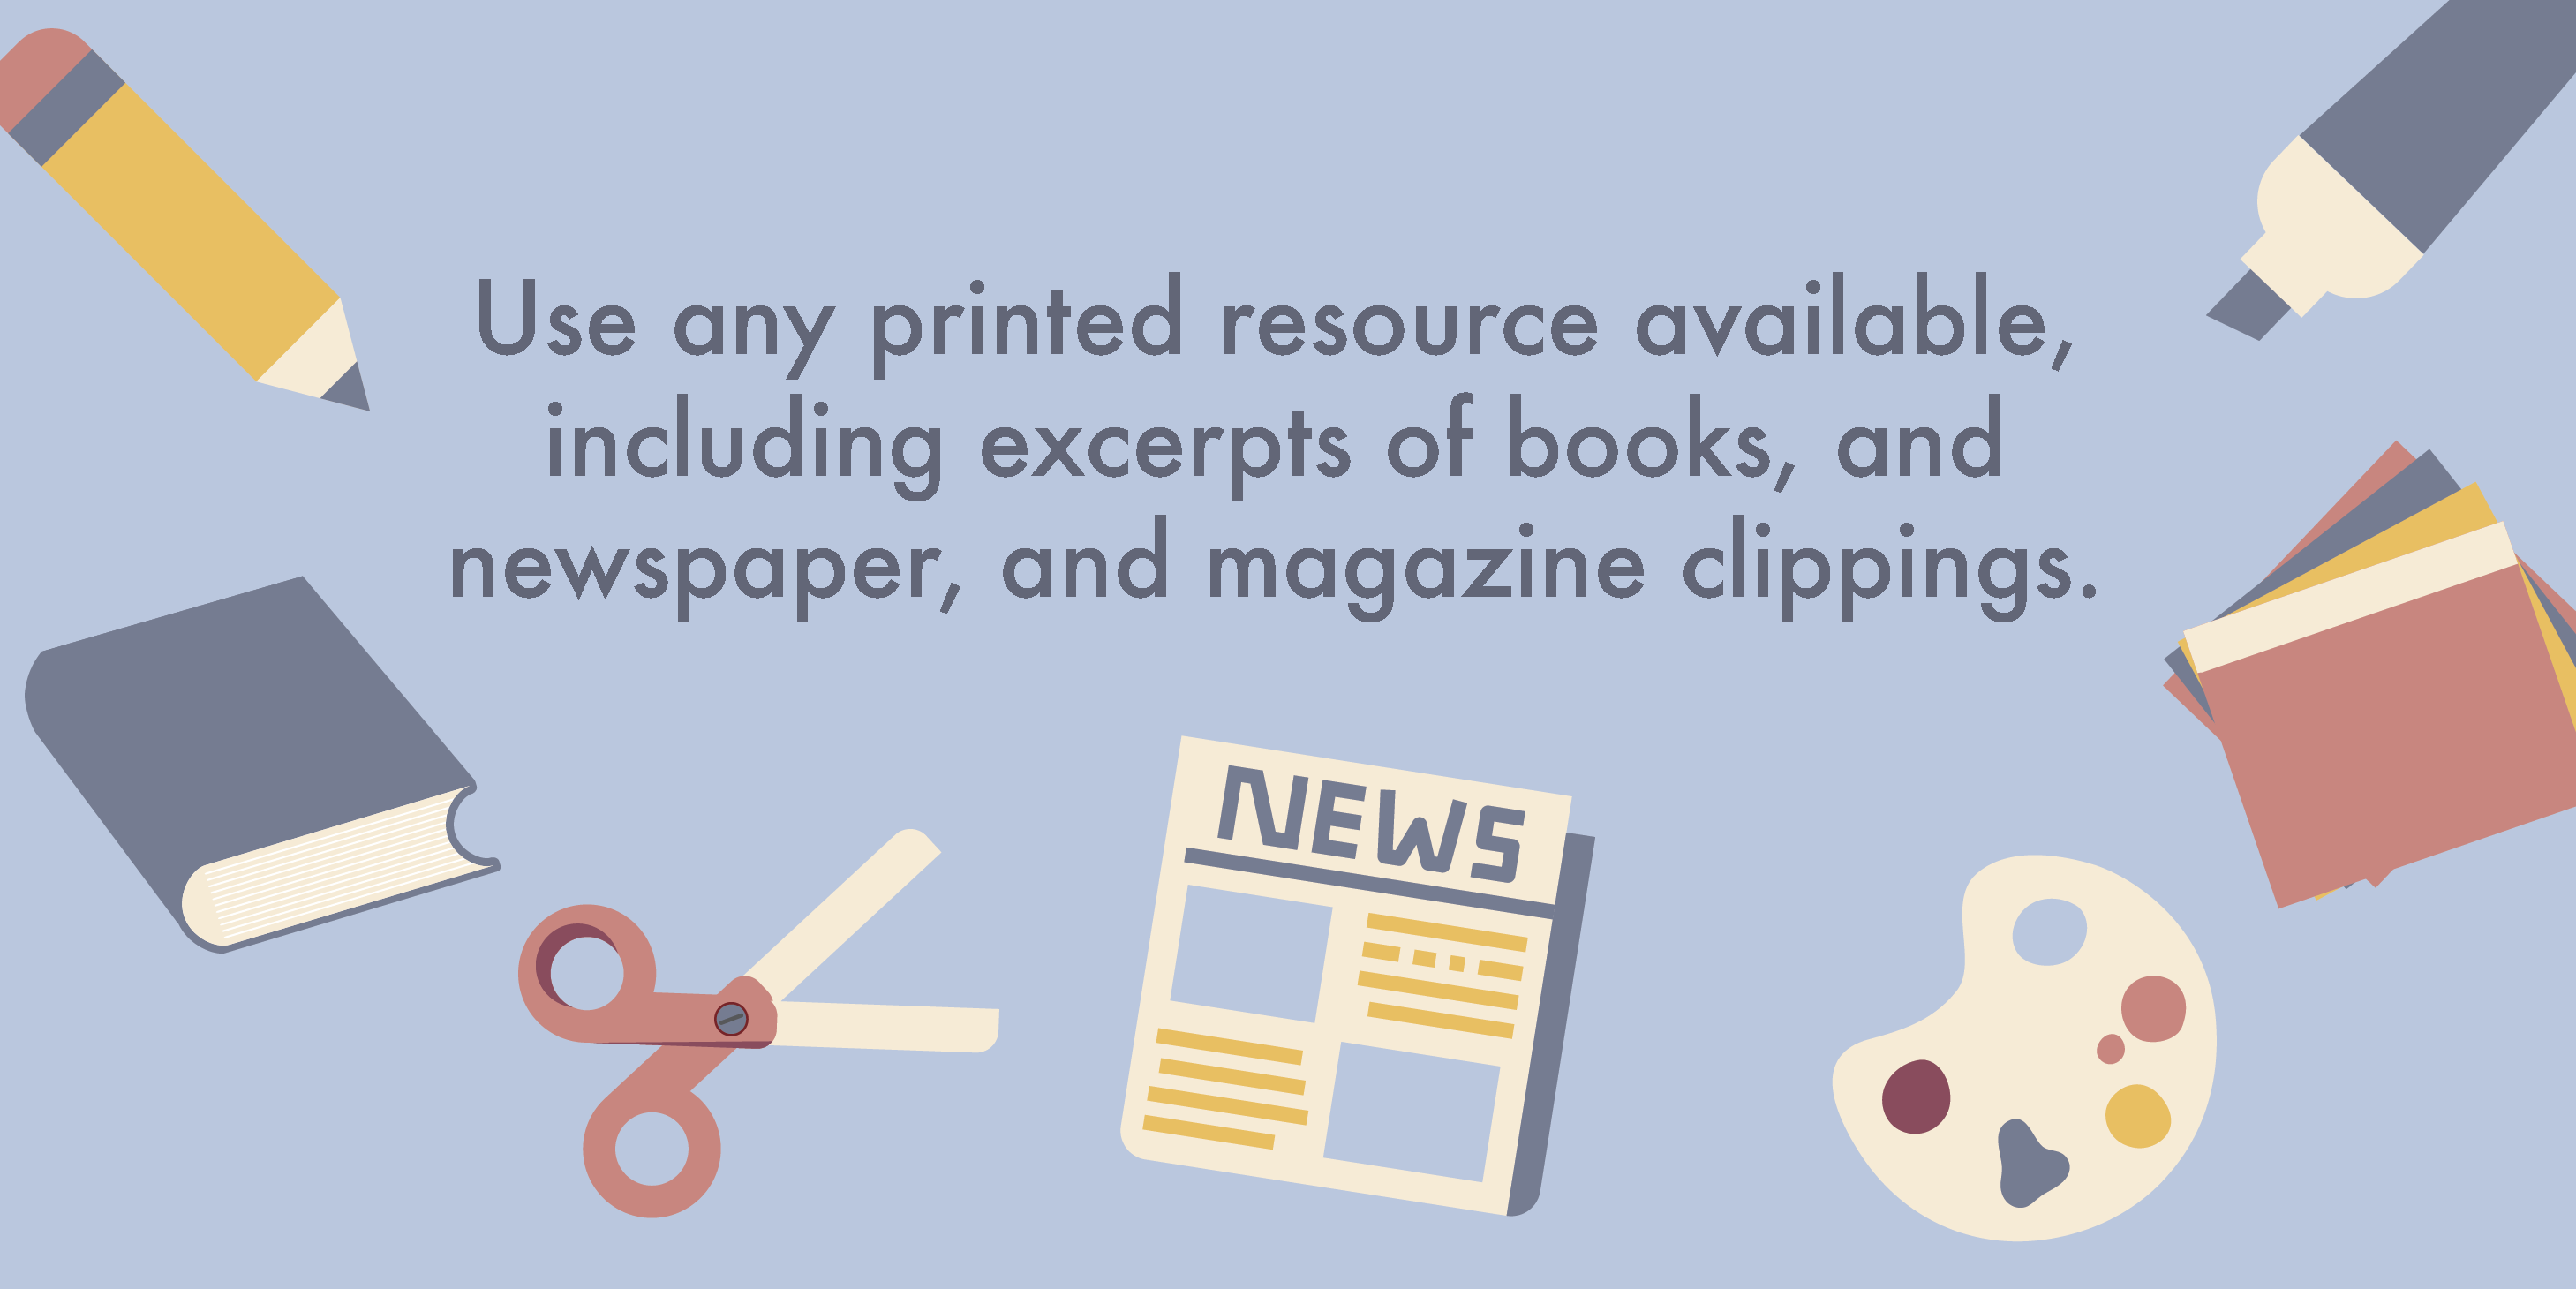 Use any printed resource available, including excerpts of books, and newspaper and magazine clippings.